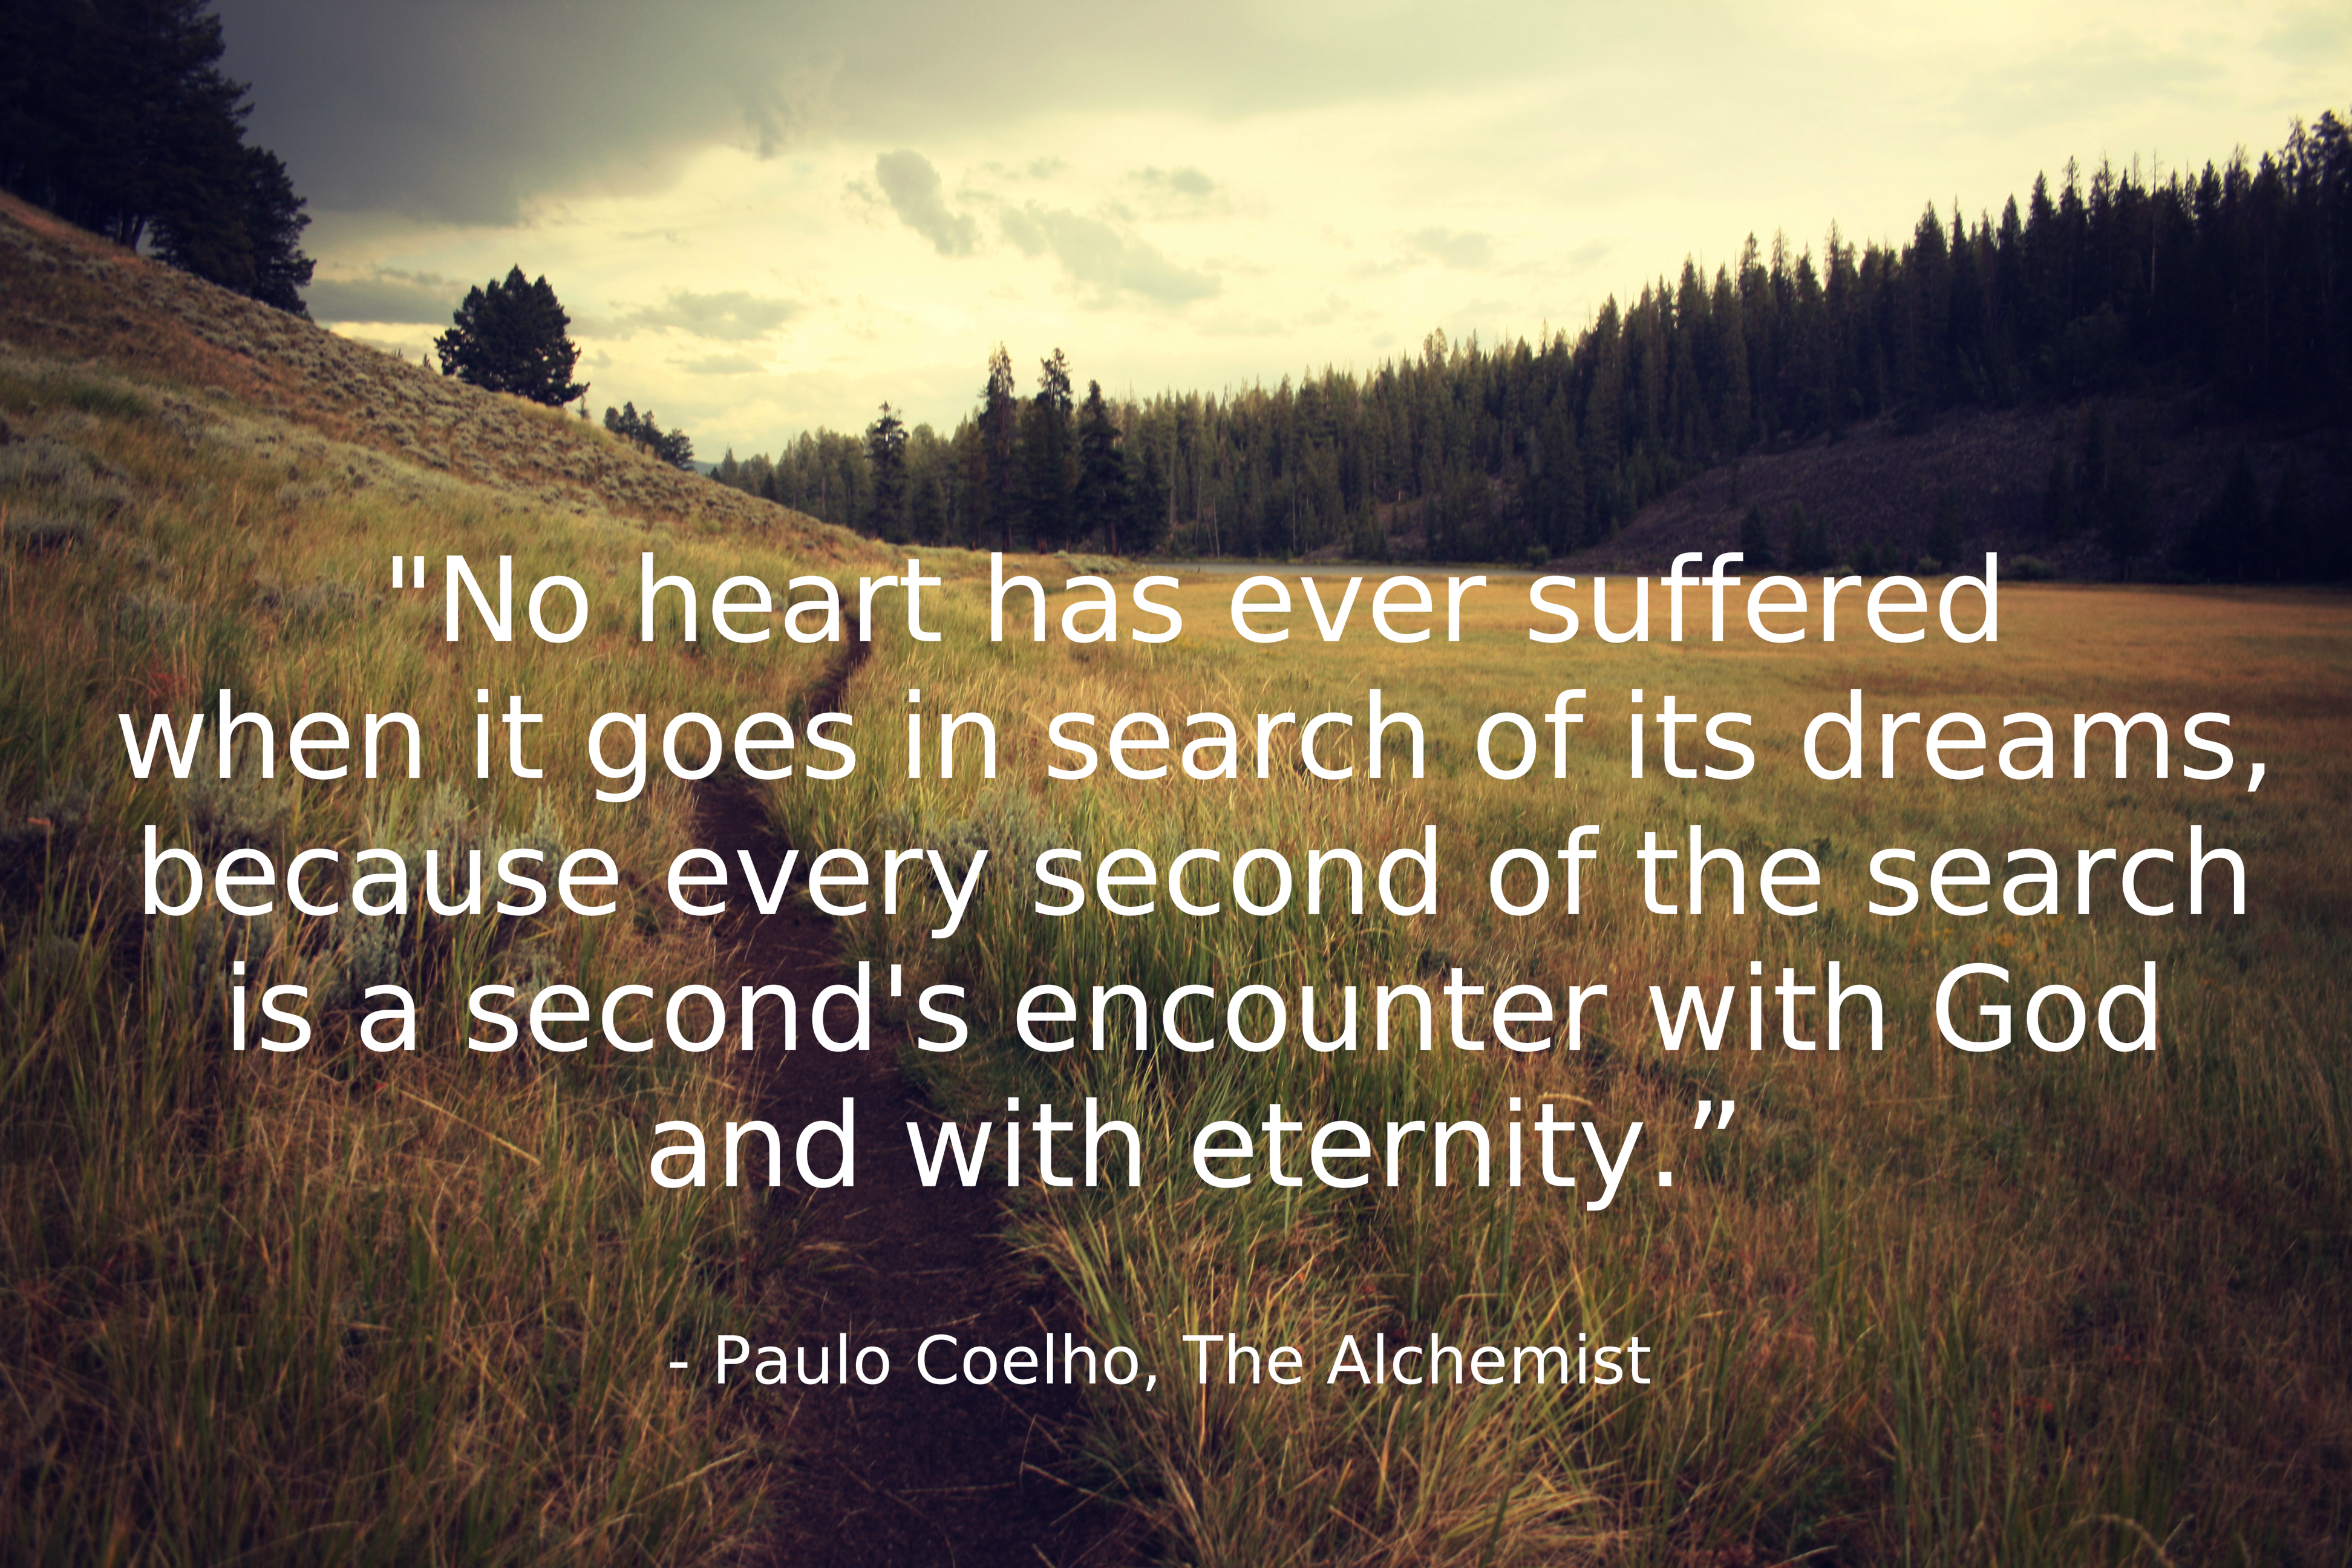 "No heart has ever suffered when it goes in search of its dream,because every second of the search, is a second's encounter with God and with eternity." - Paulo Coelho